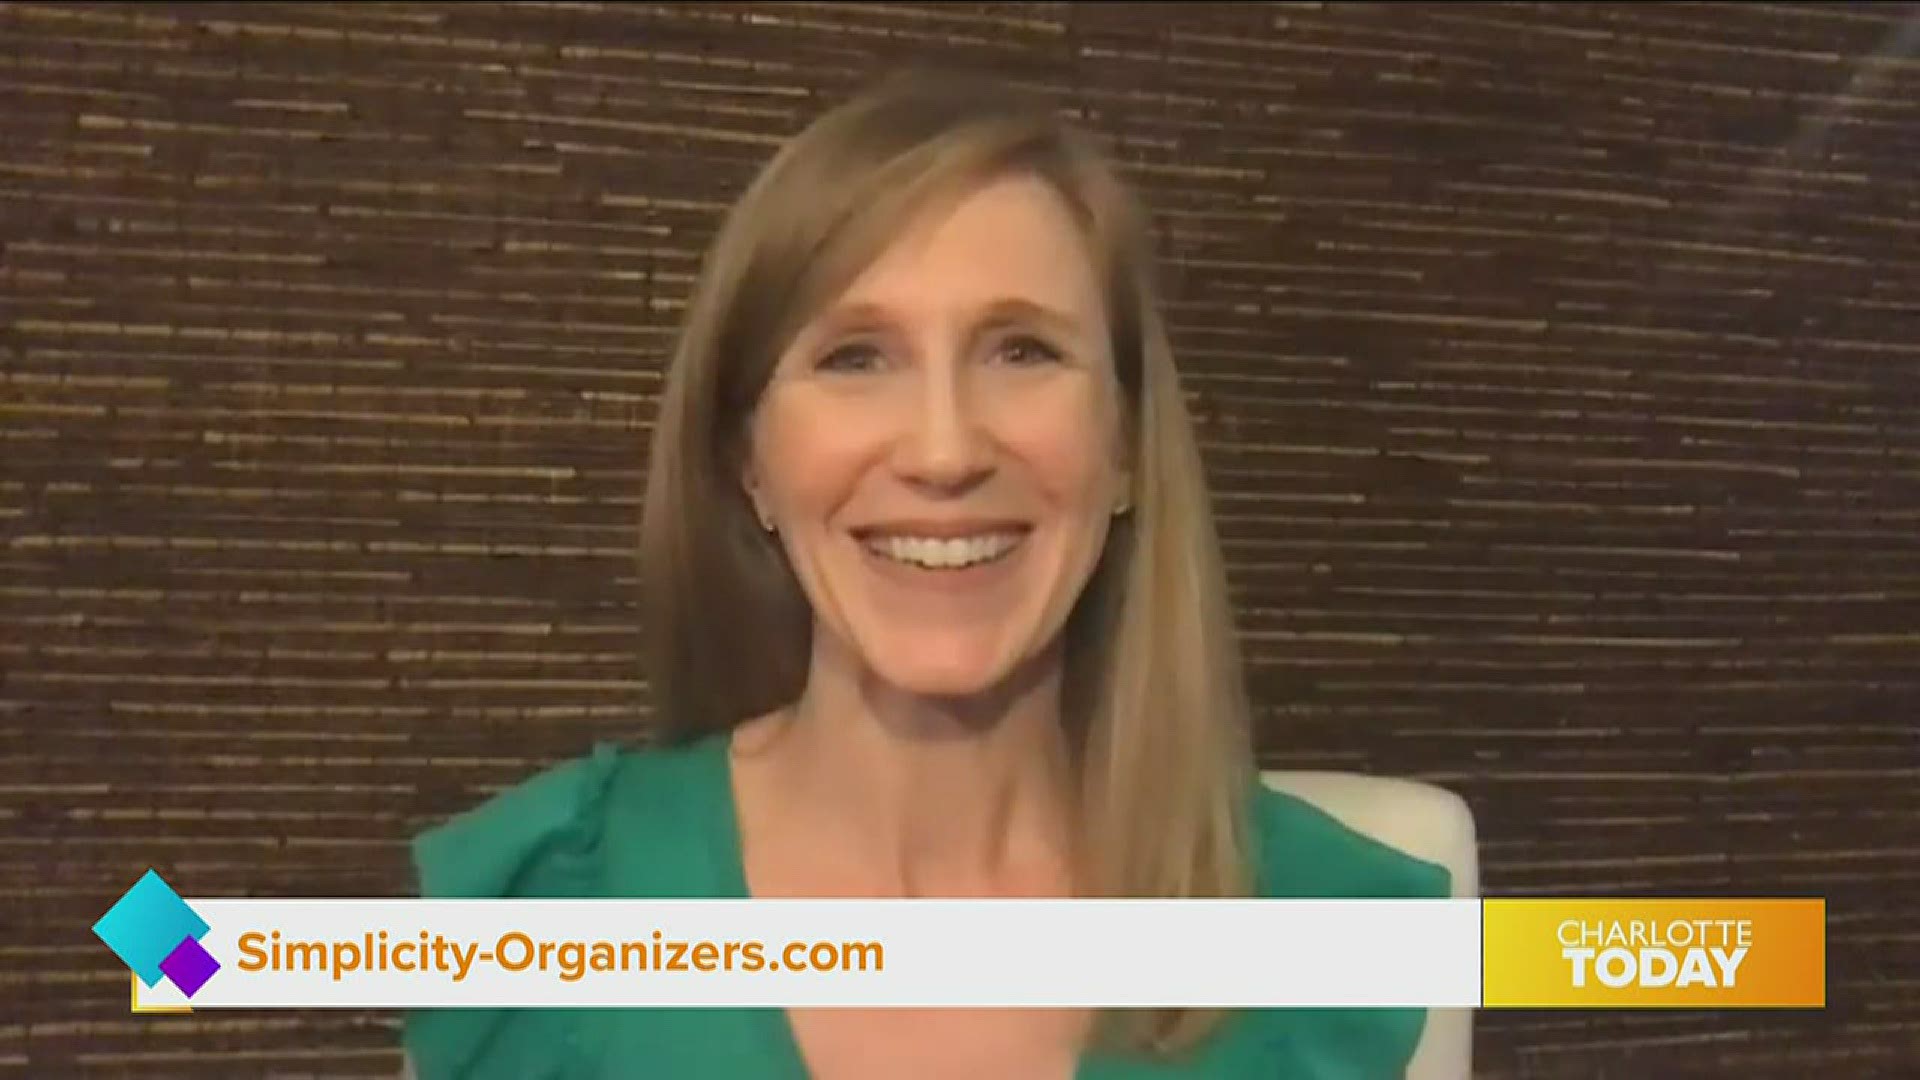 Laurie Martin with Simplicity Organizers shares steps you can take each day for an organized home.